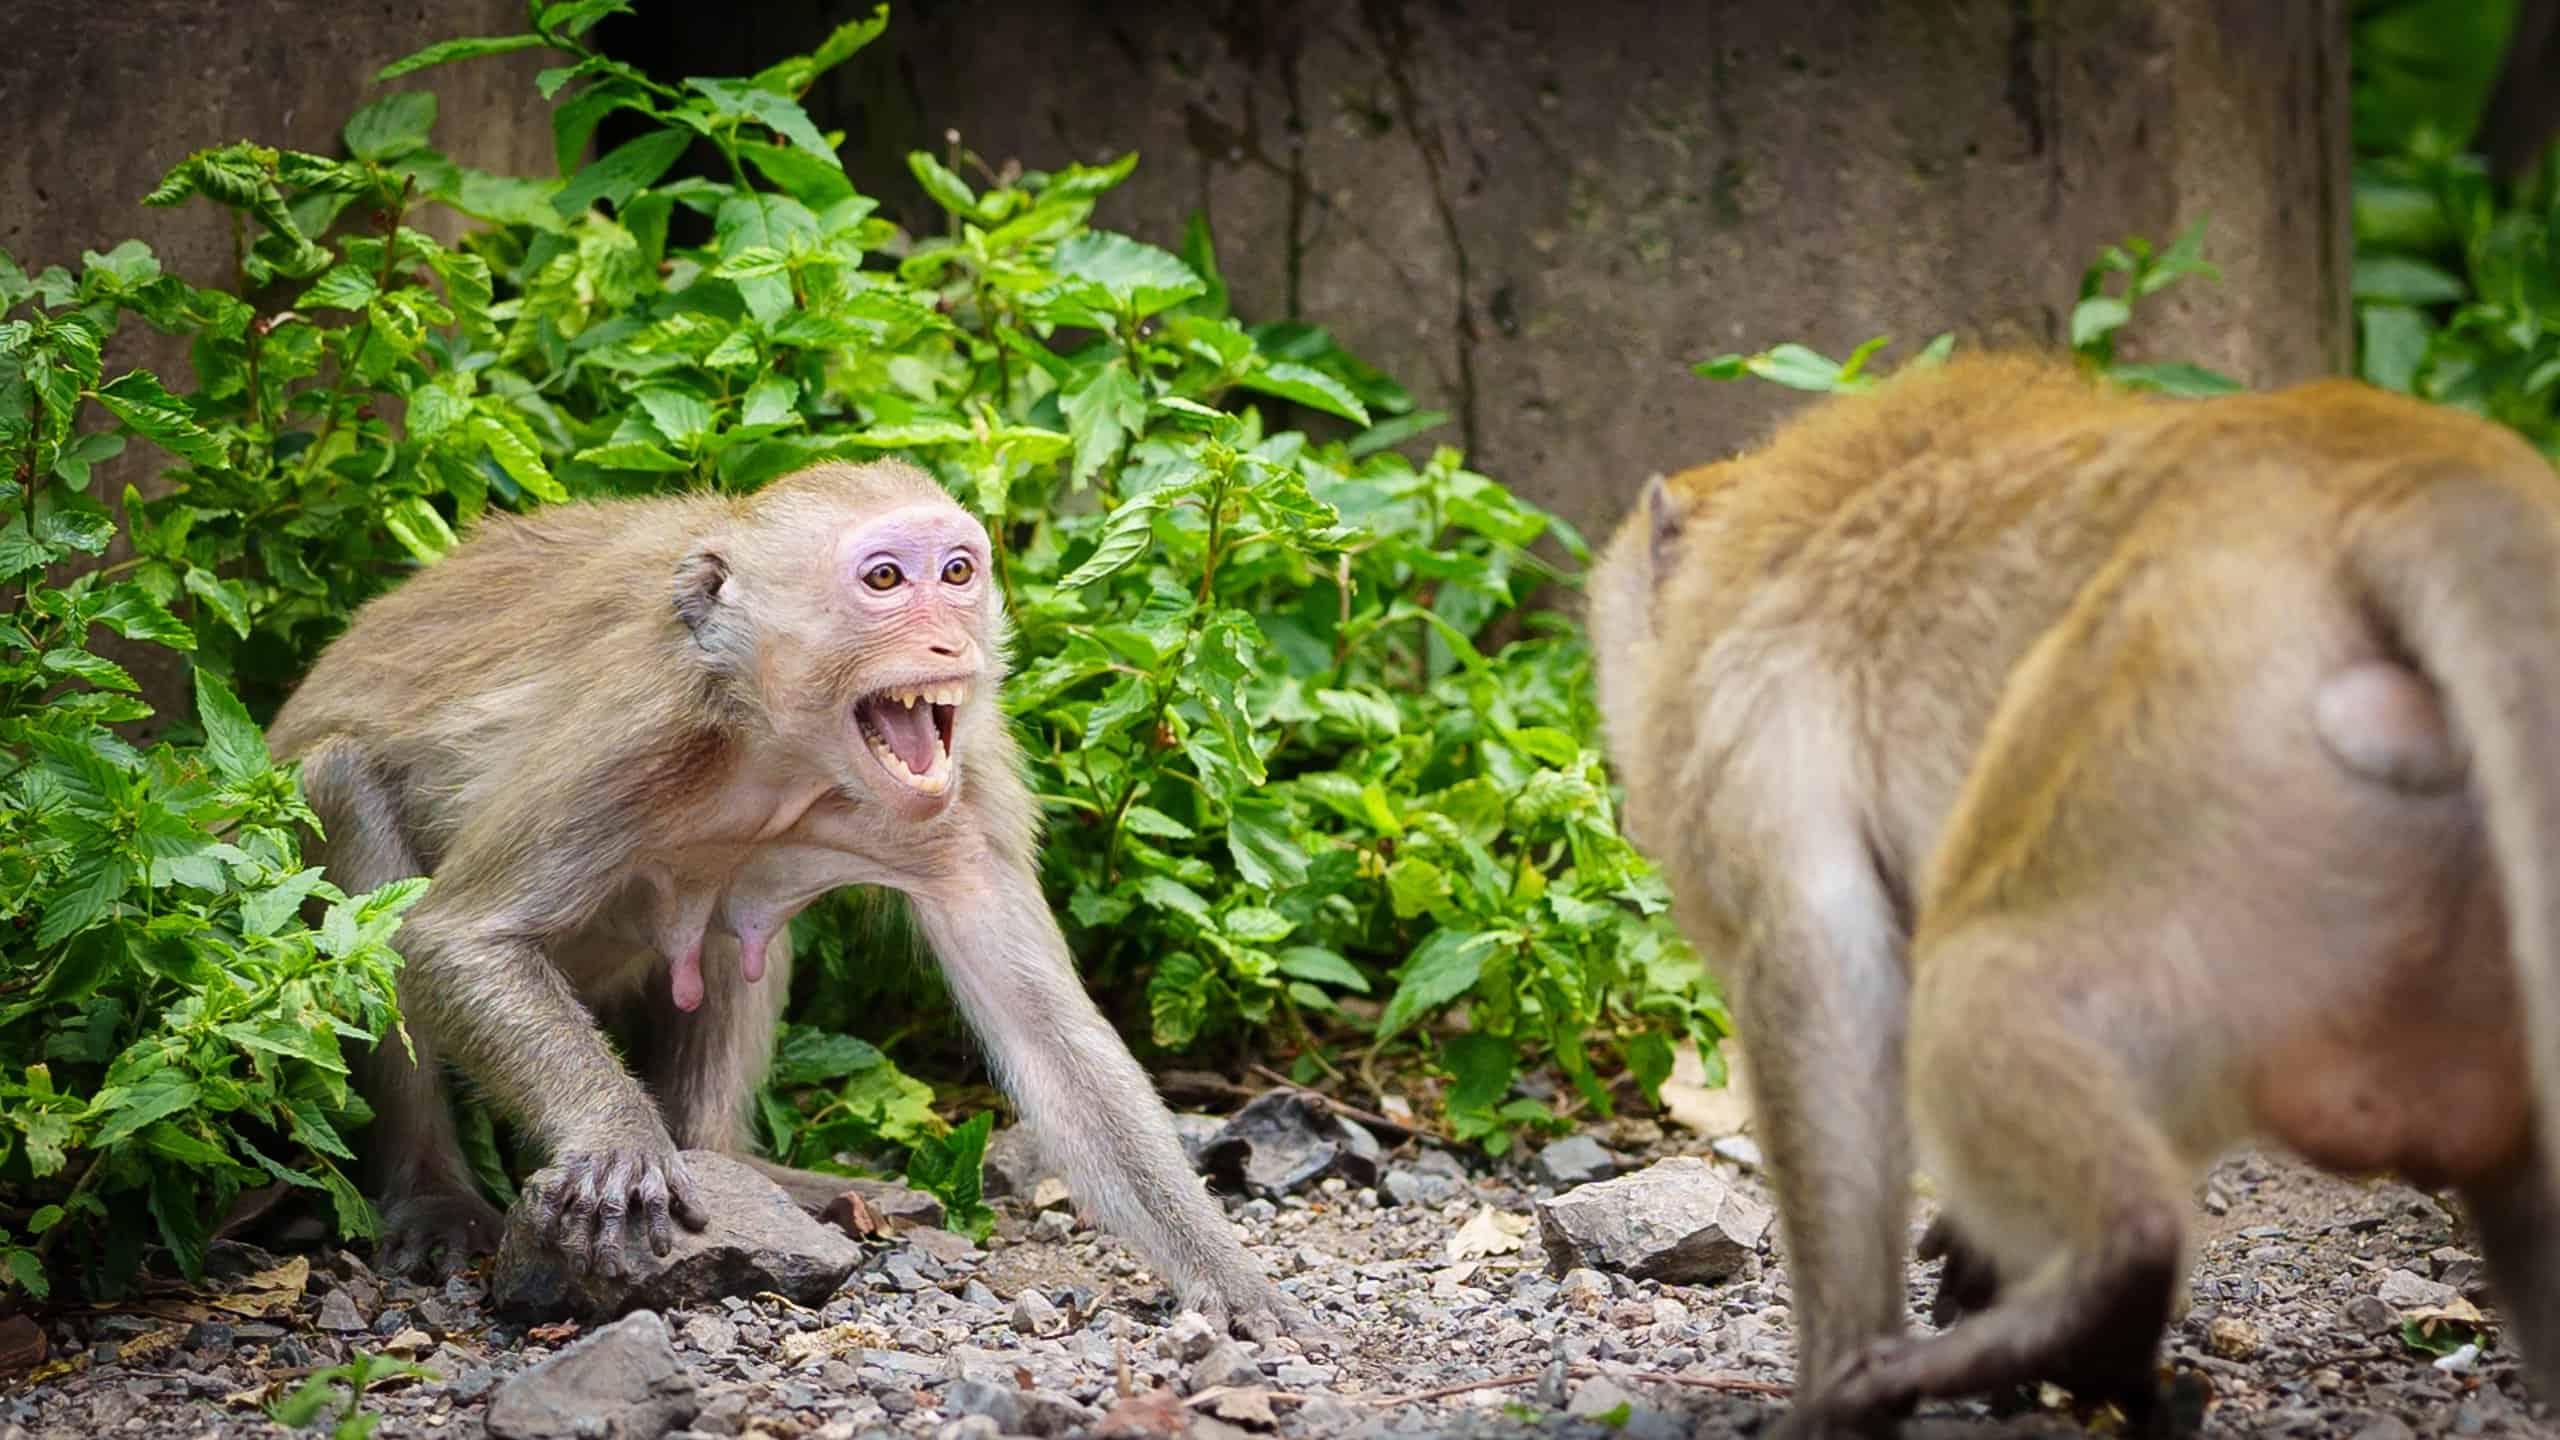 Why Do Monkeys Fight Each Other? 6 Reasons Revealed - A-Z Animals